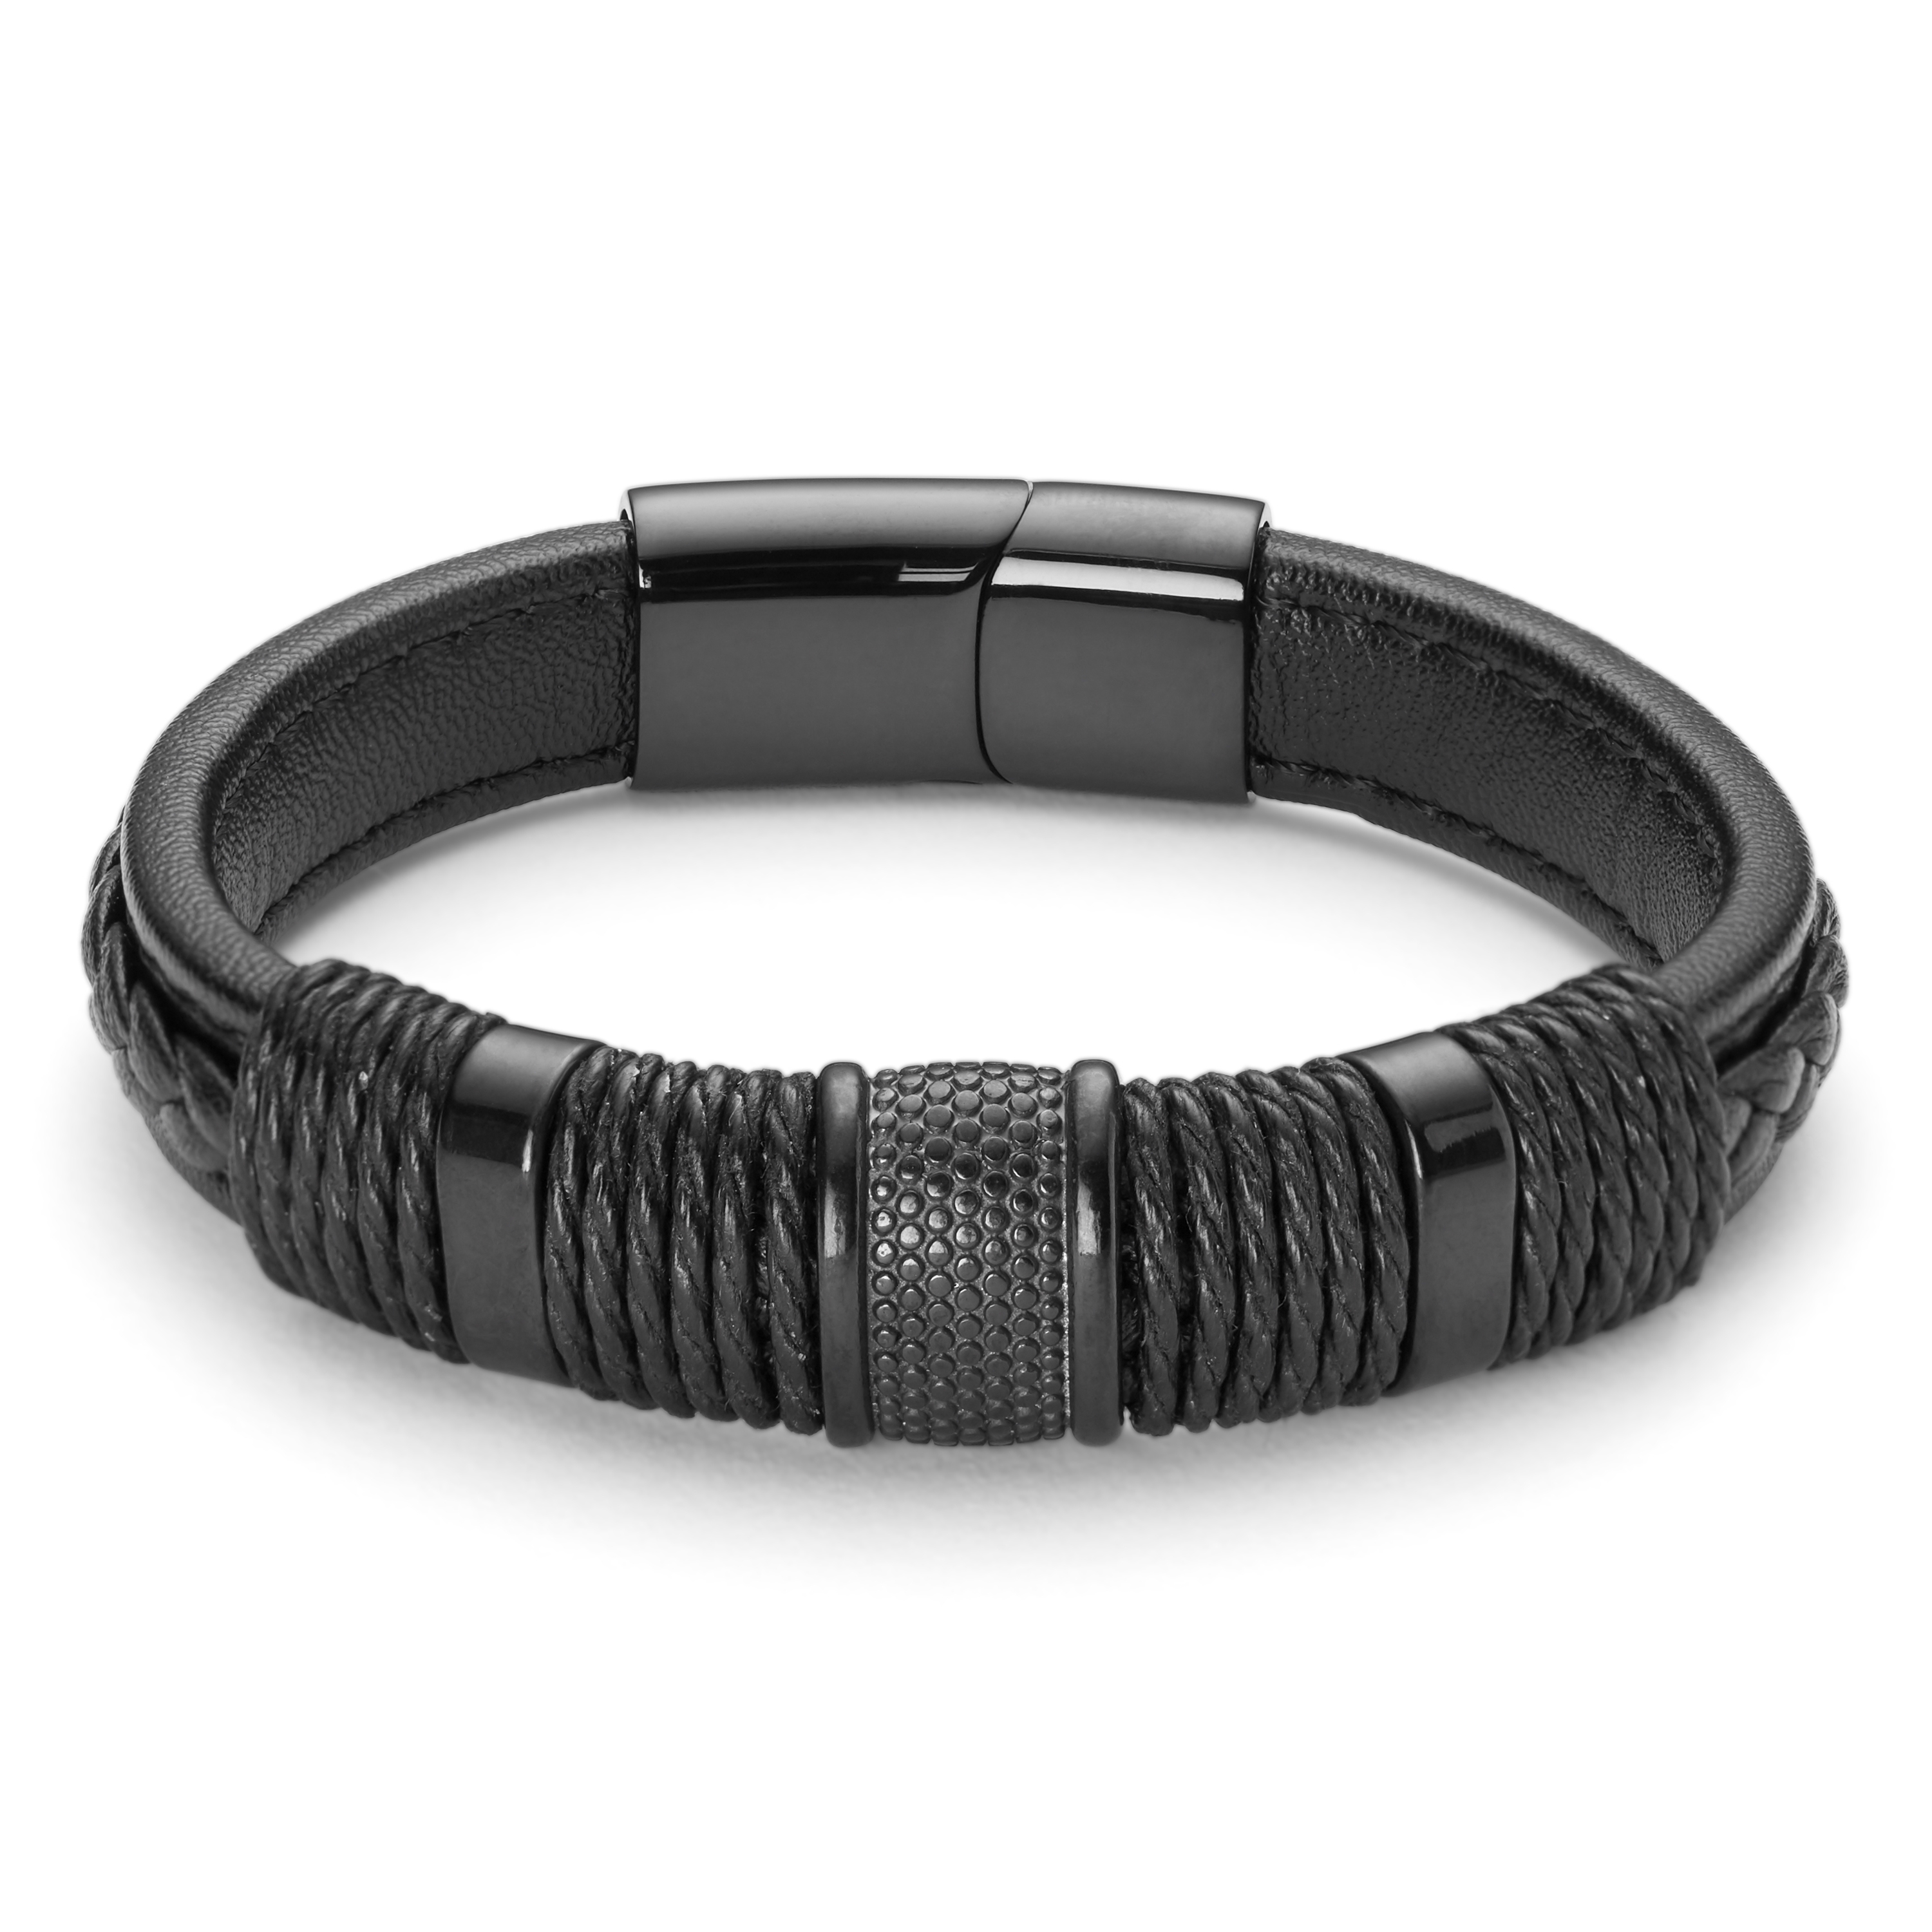 Men's All Black Leather Band and Rope String Bracelet